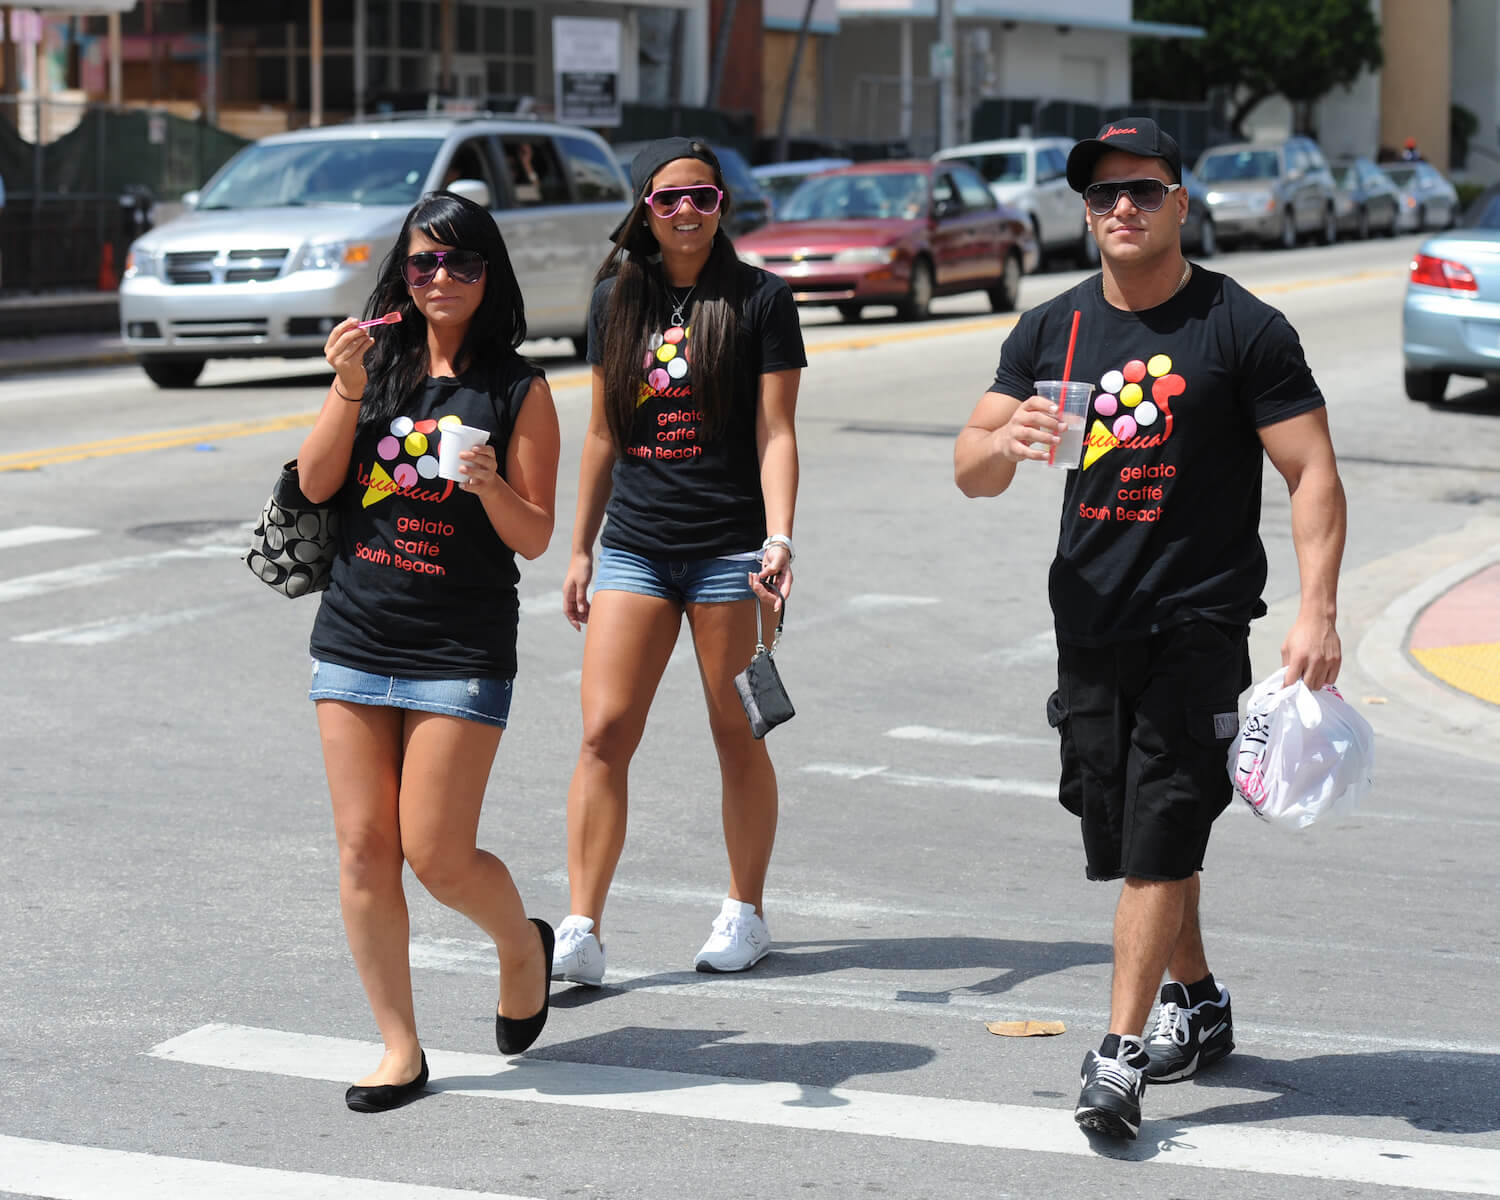 'Jersey Shore: Family Vacation' stars Angelina Pivarnick, Sammi 'Sweetheart' Giancola, and Ronnie Ortiz-Magro walking in Miami in 2010